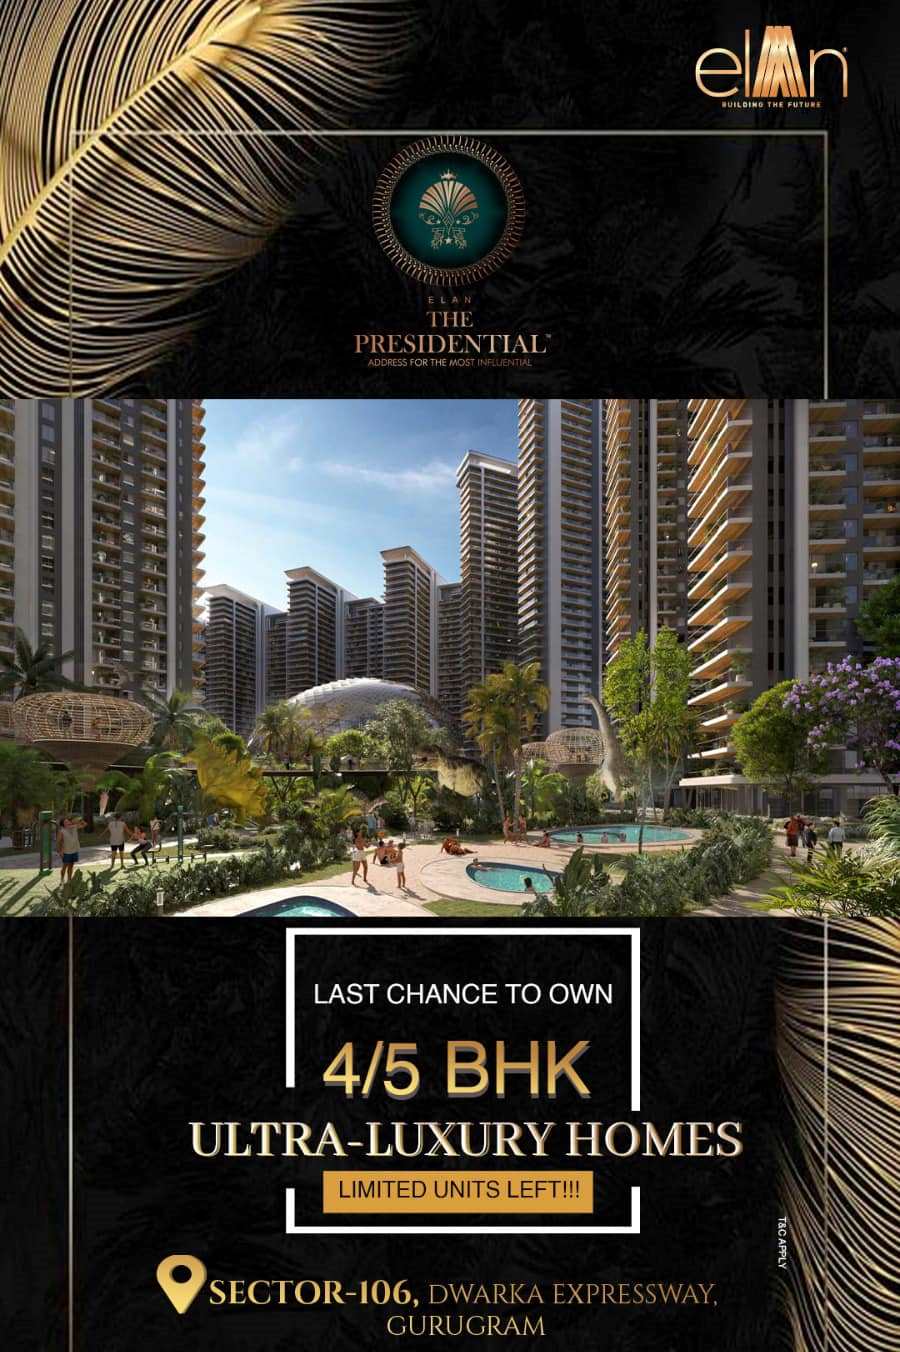 Last chance to own 4 and 5 BHK ultra luxury home at Elan The Presidential, Gurgaon Update